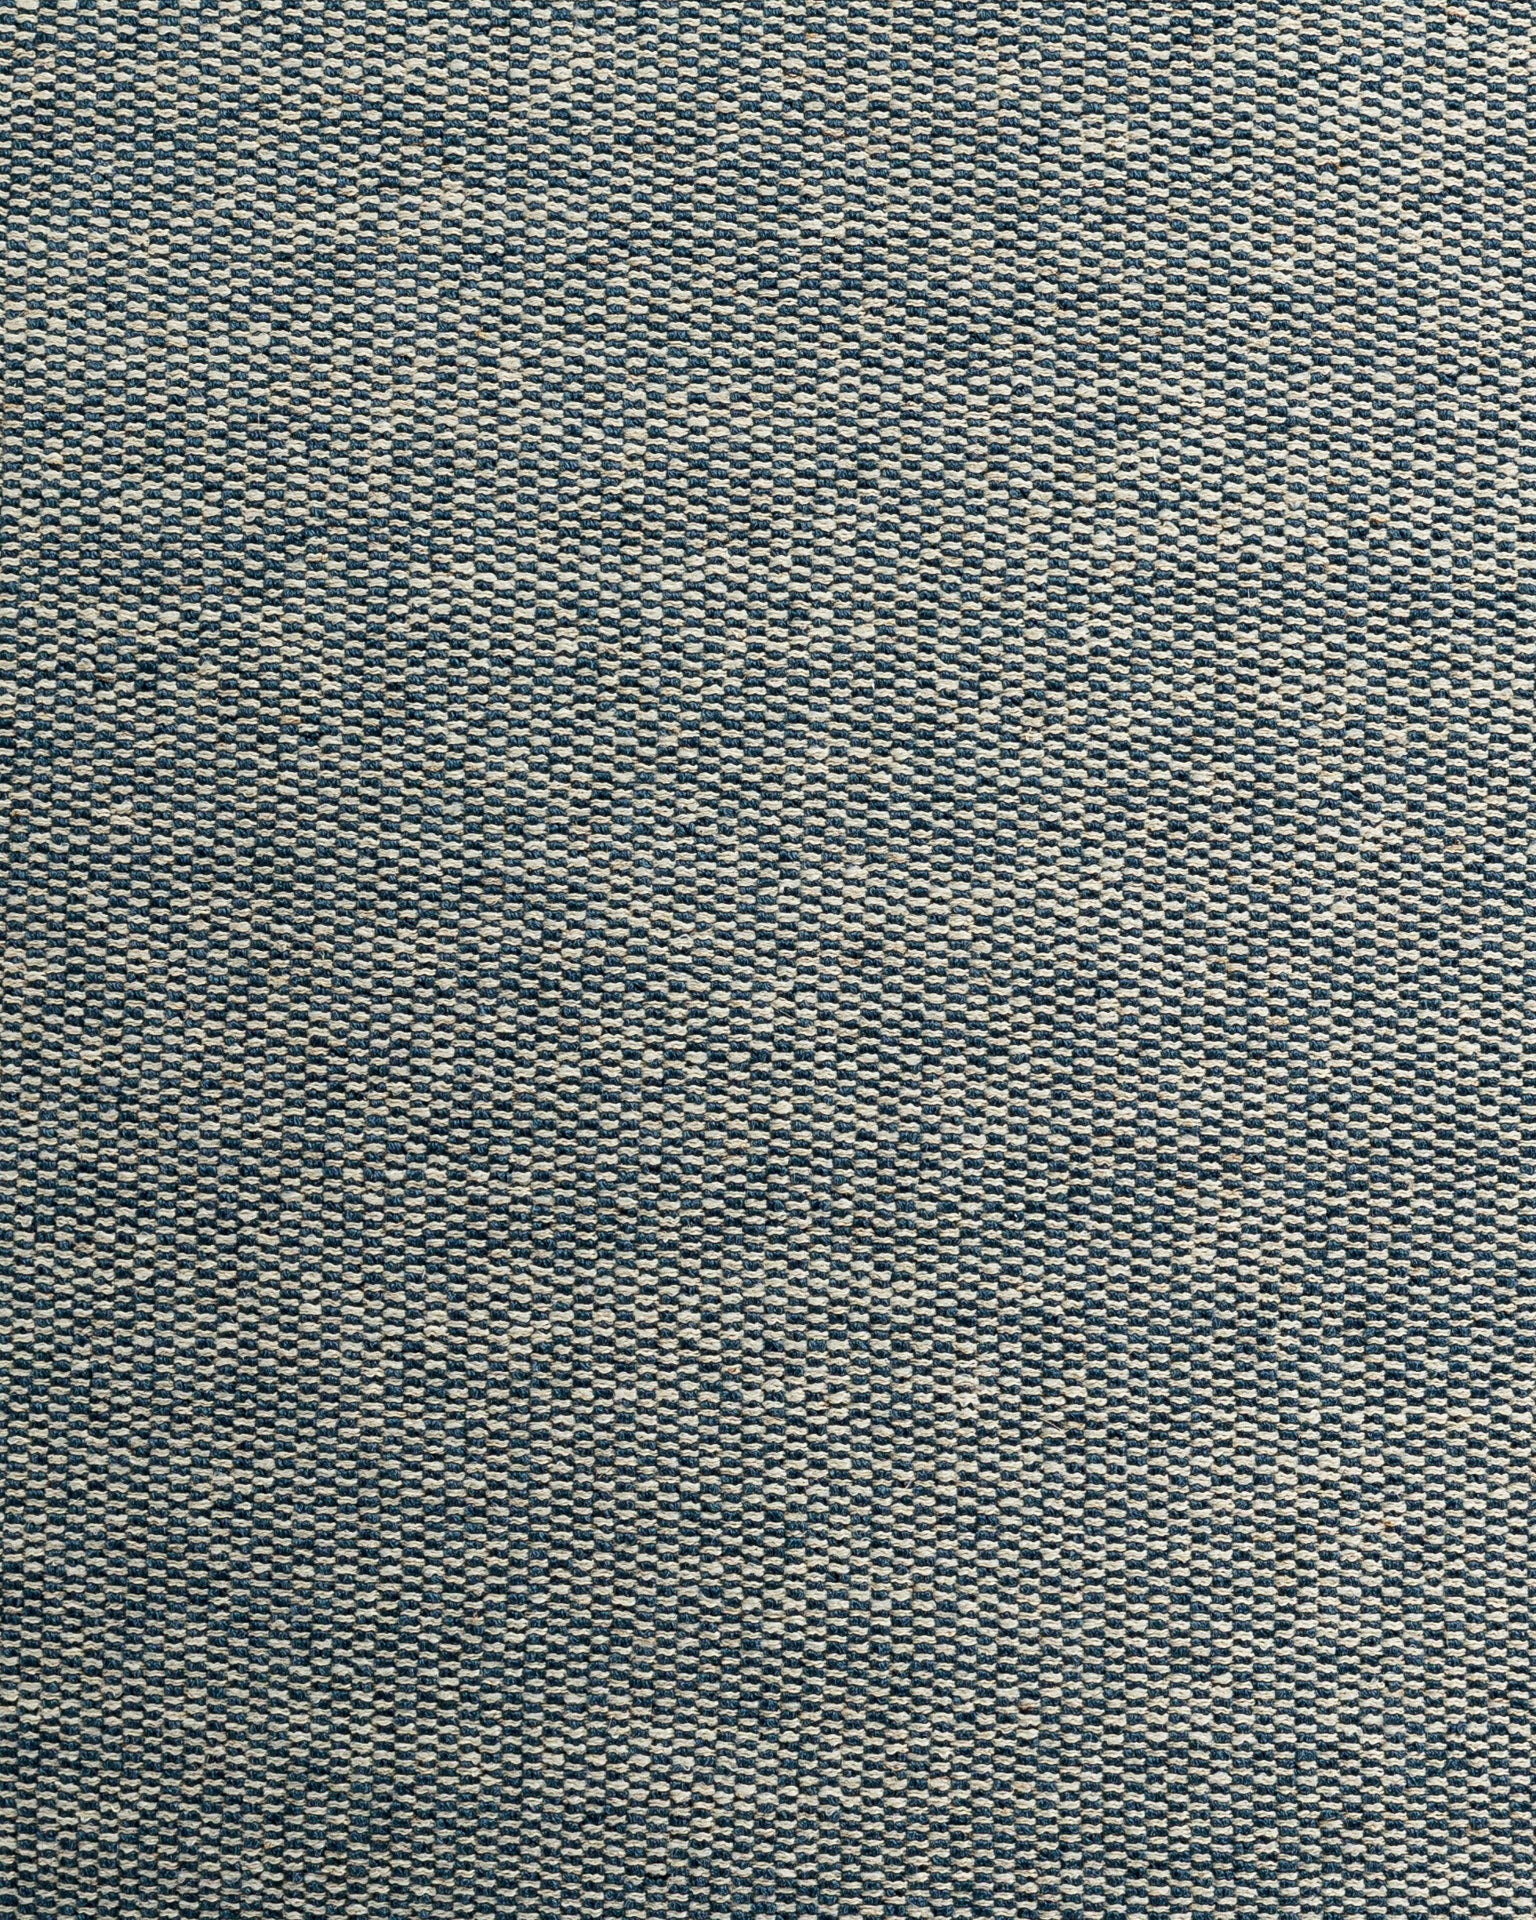 Close-up texture of a blue denim fabric showcasing detailed weaving patterns with light and dark blue threads in Scottsdale, Arizona.